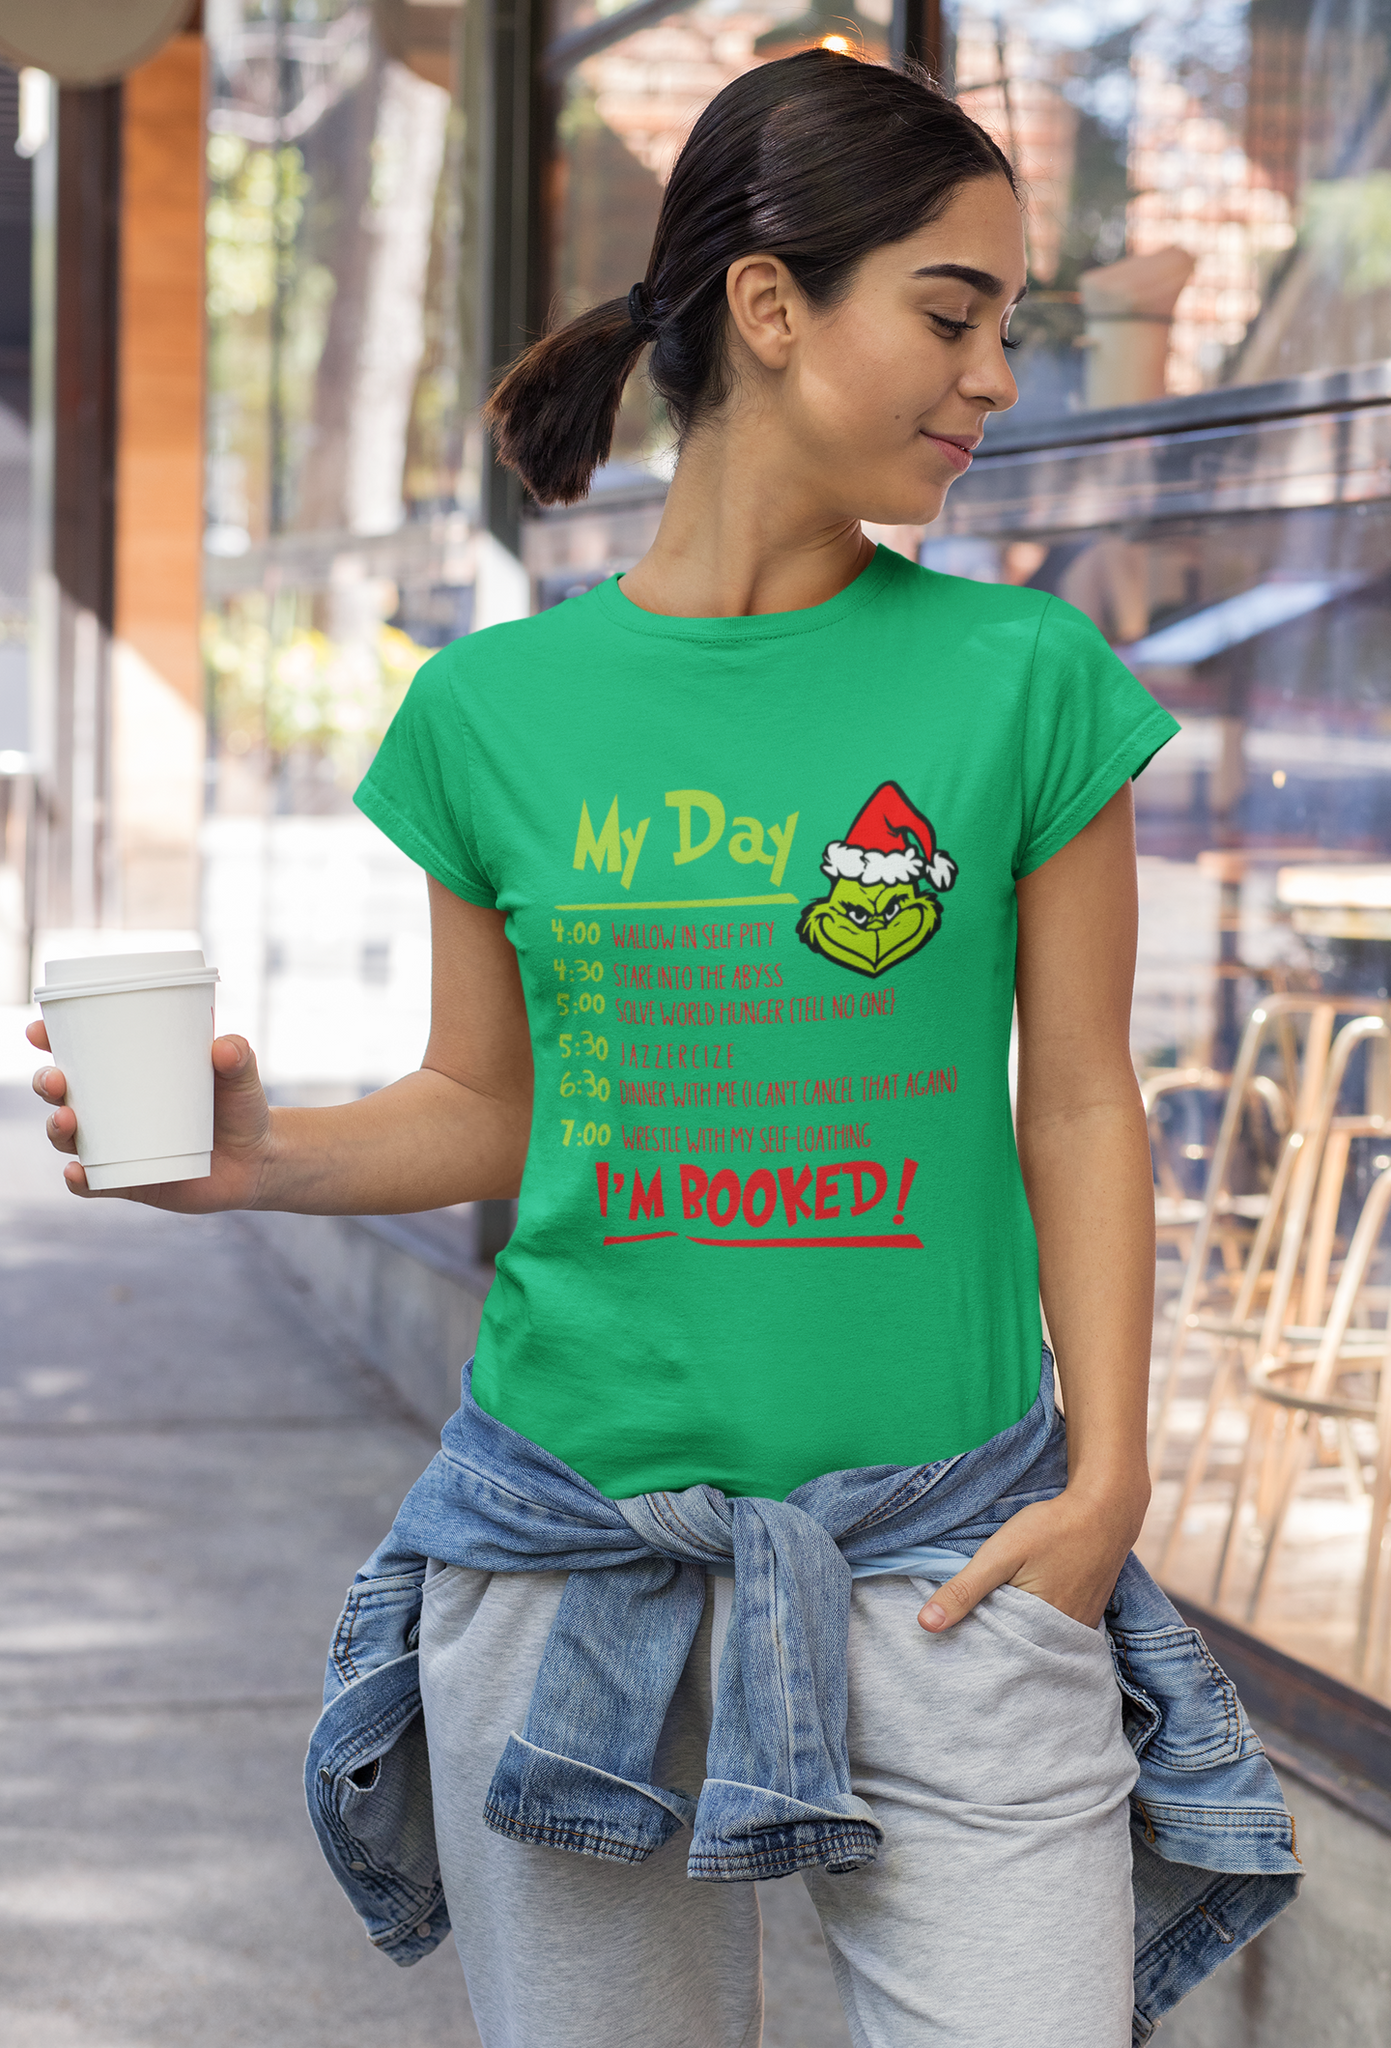 Grinch T Shirt, My Day Im Booked Tshirt, Christmas Gifts